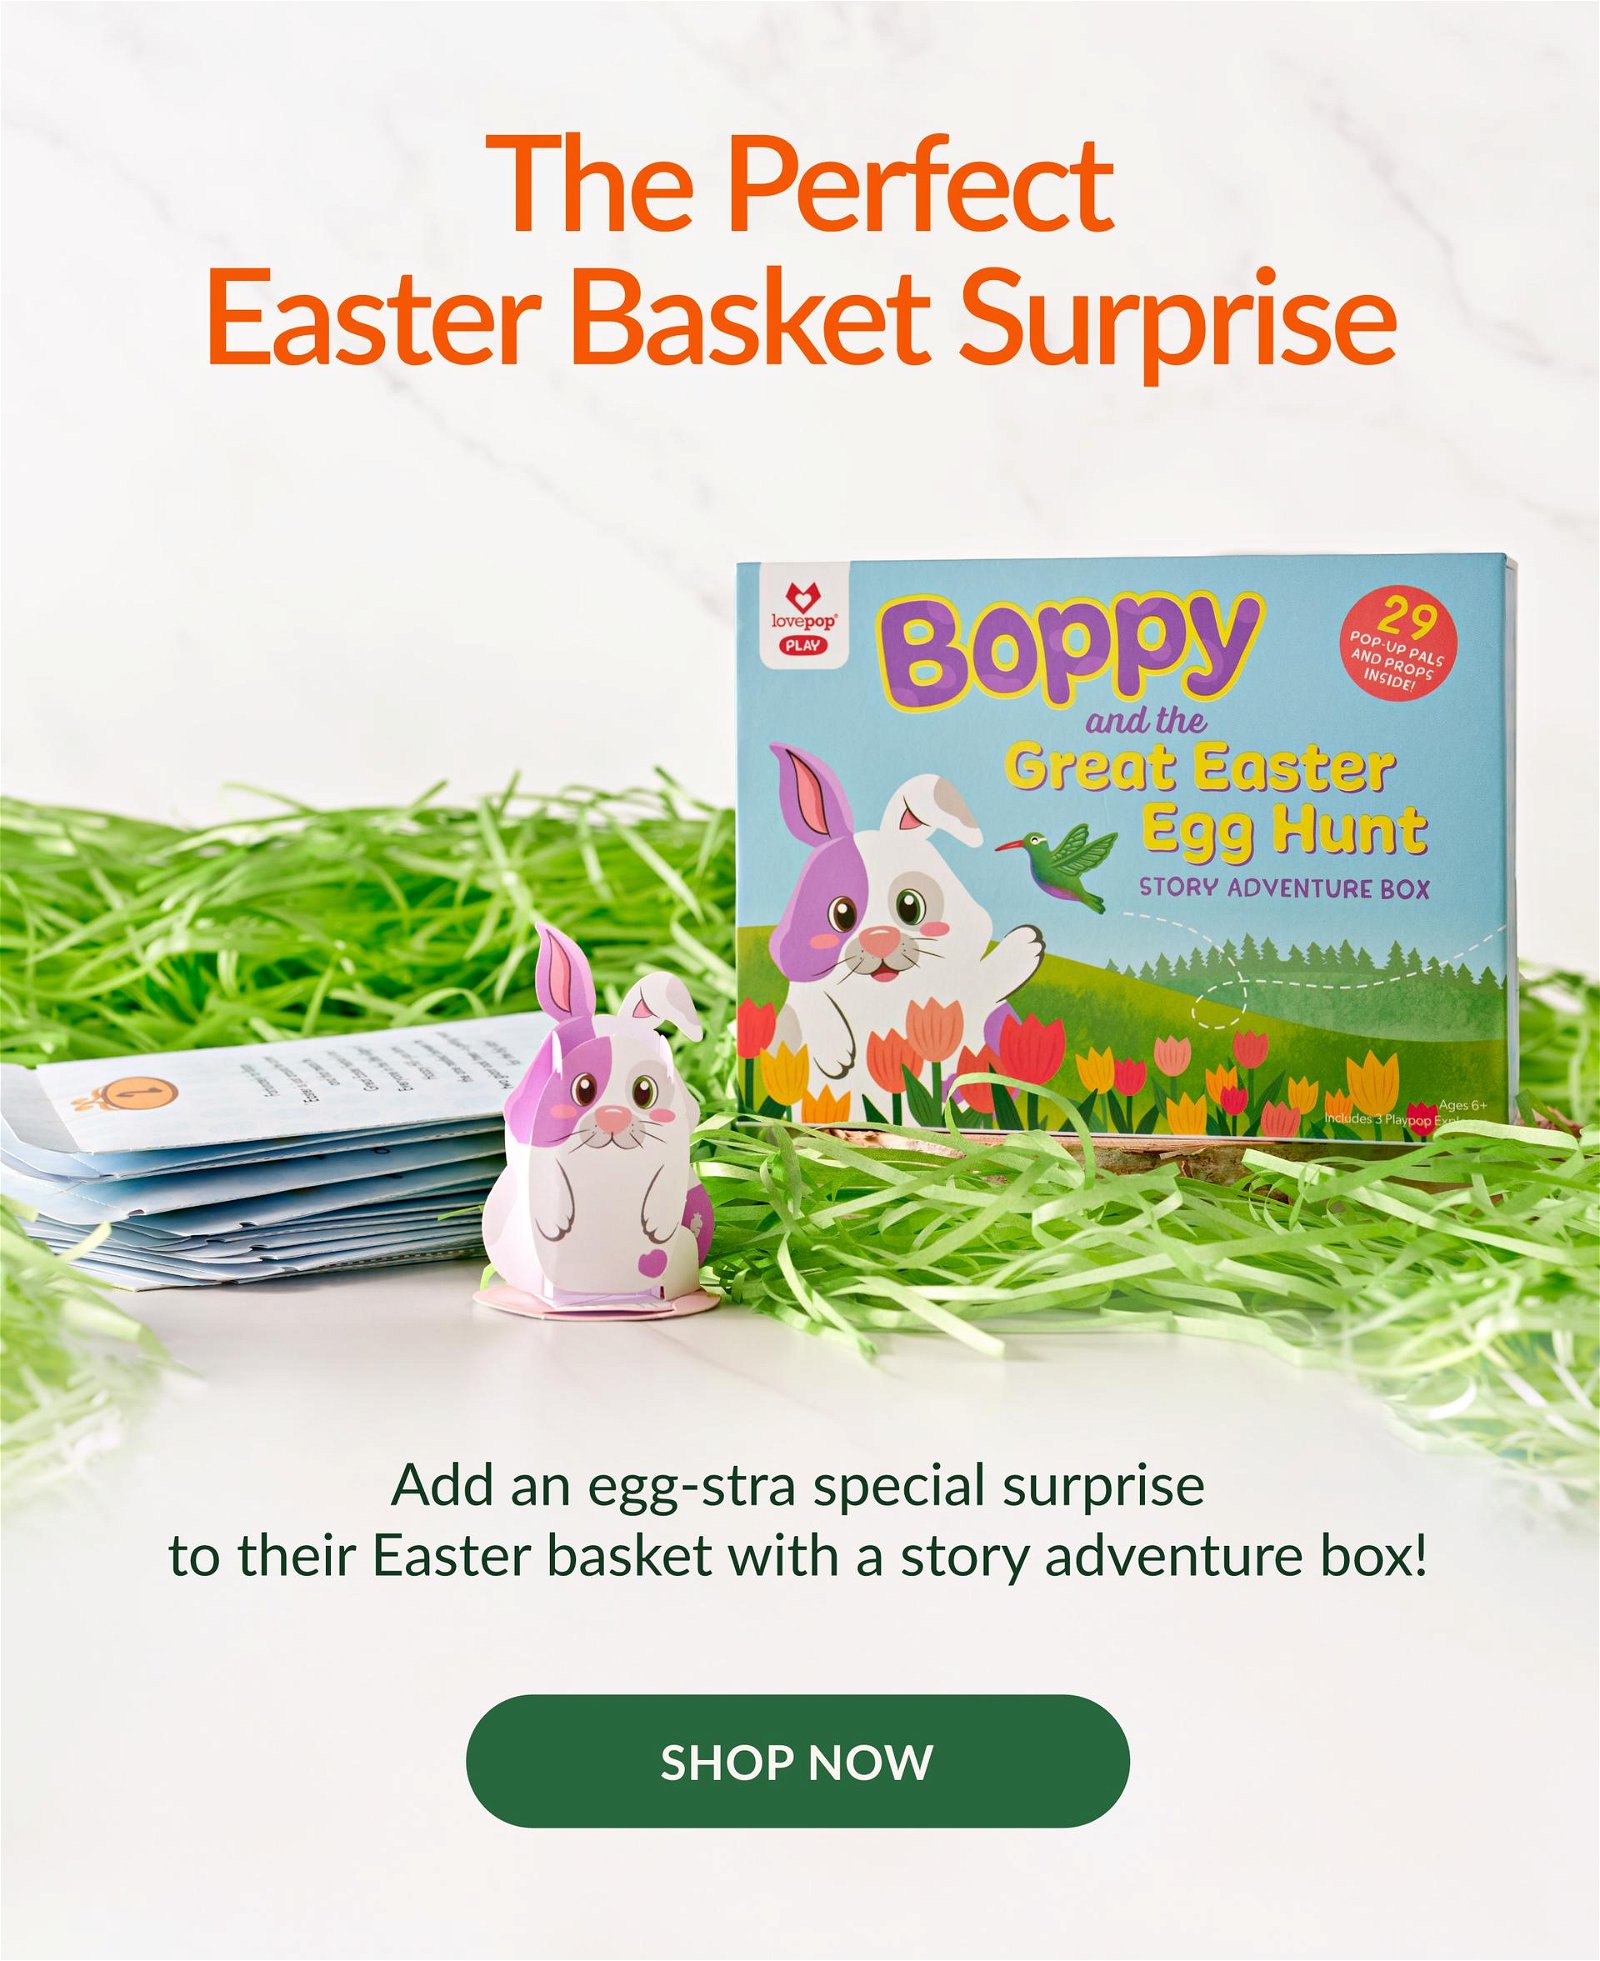 The Perfect Easter Basket Surprise